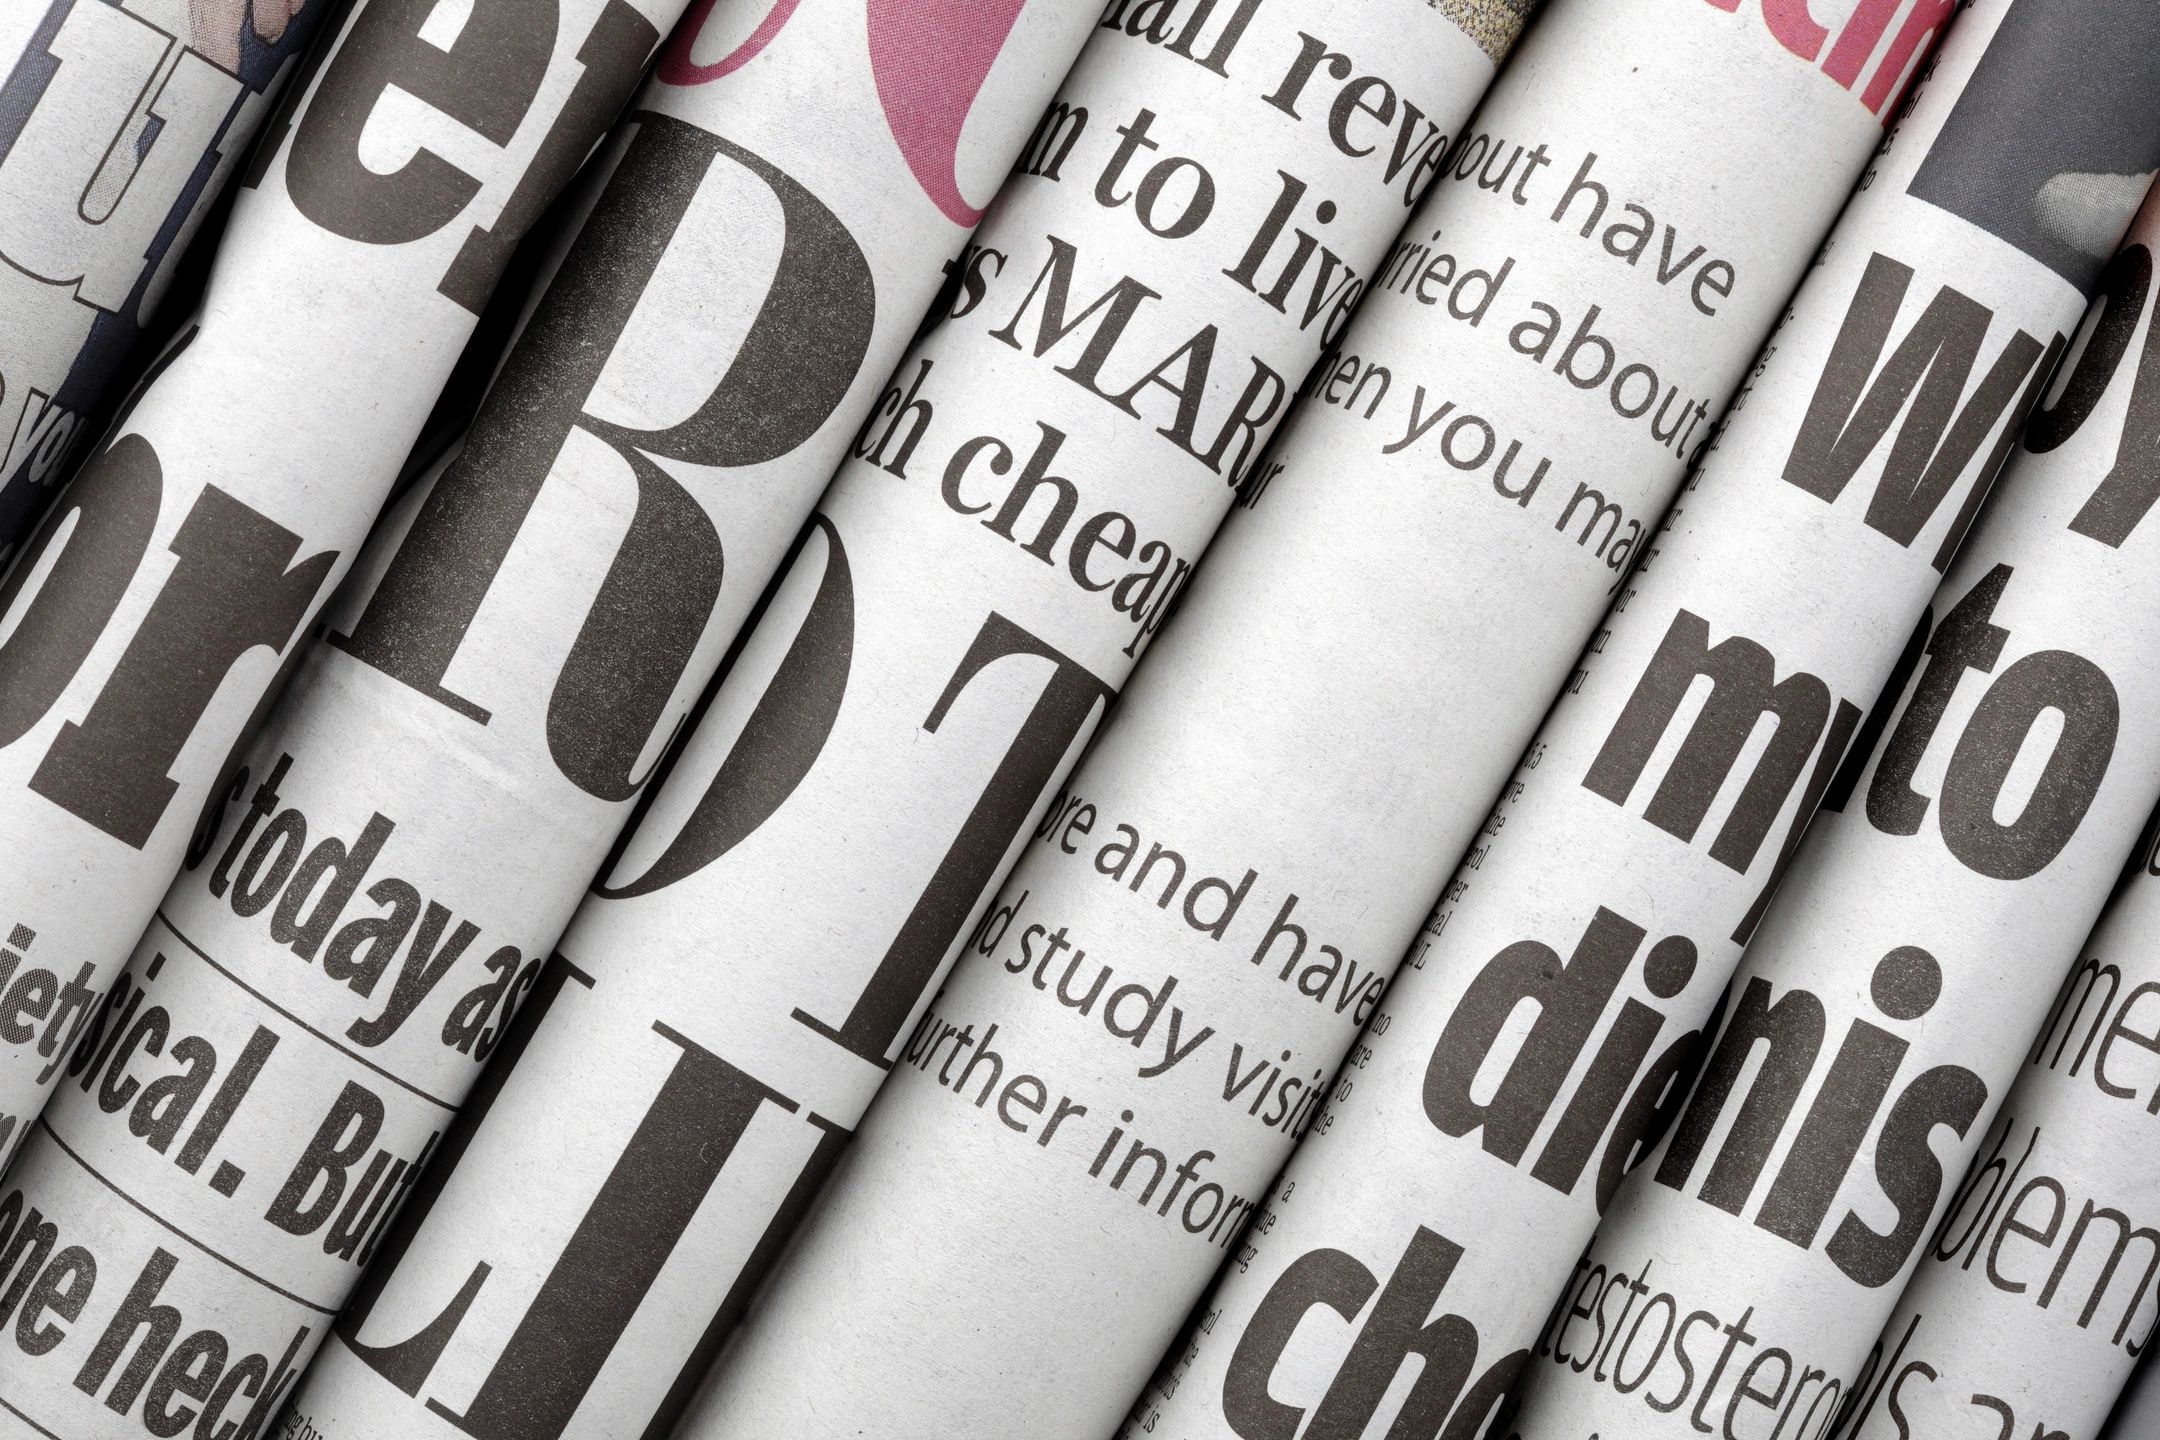 Image Of Several Newspapers All Folded And Placed Next To Each Other Such That You Can Only See The Fold.